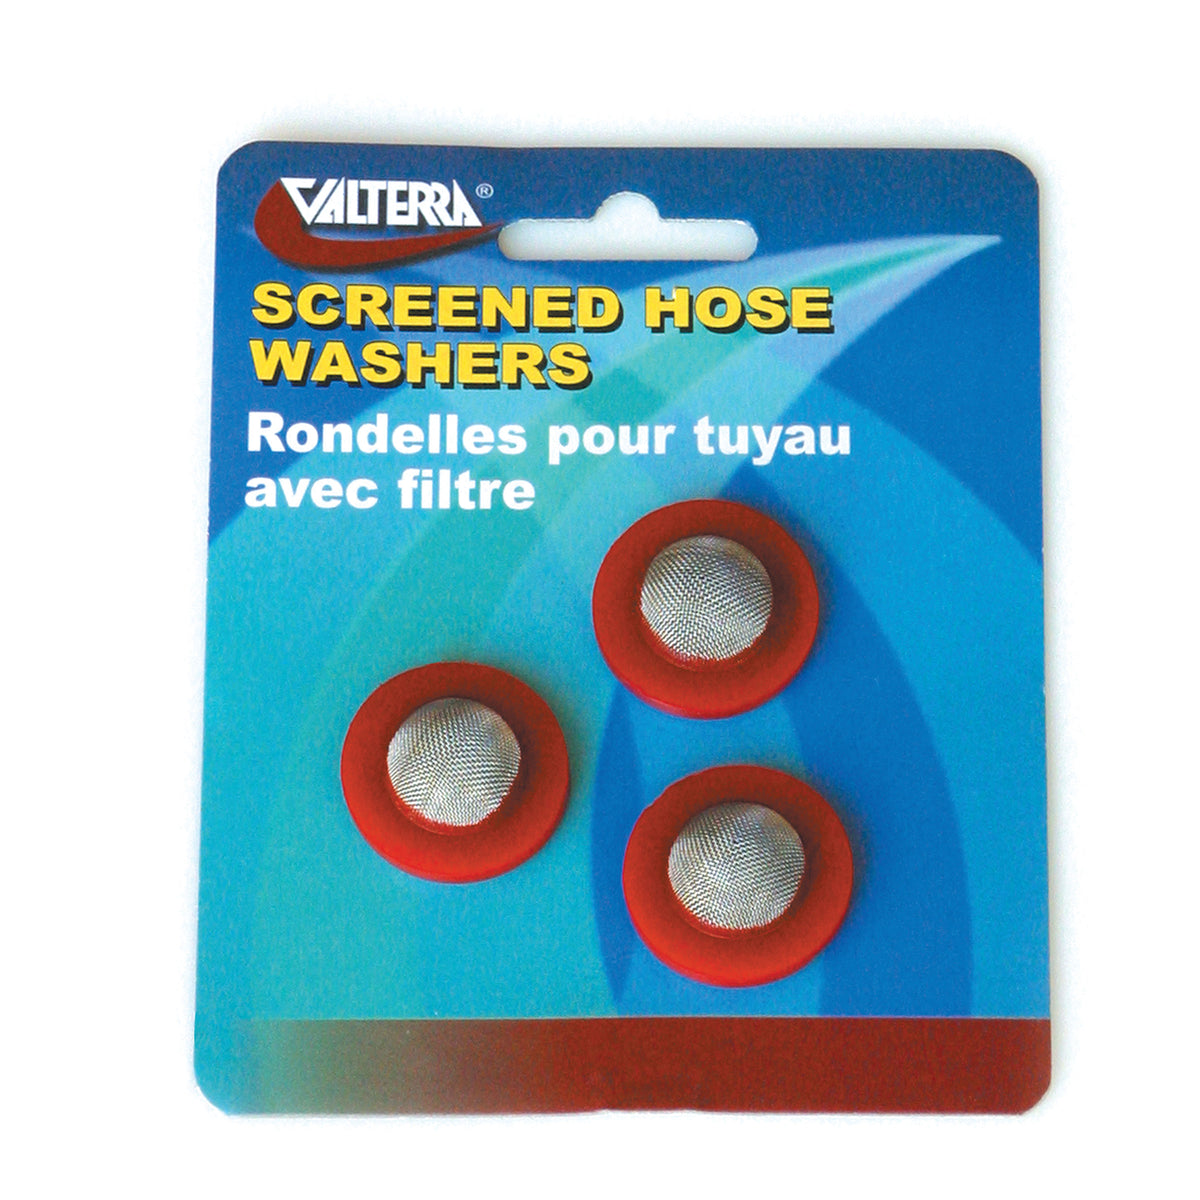 Valterra W1526VP Screened Hose Washers - Red, Pack of 3